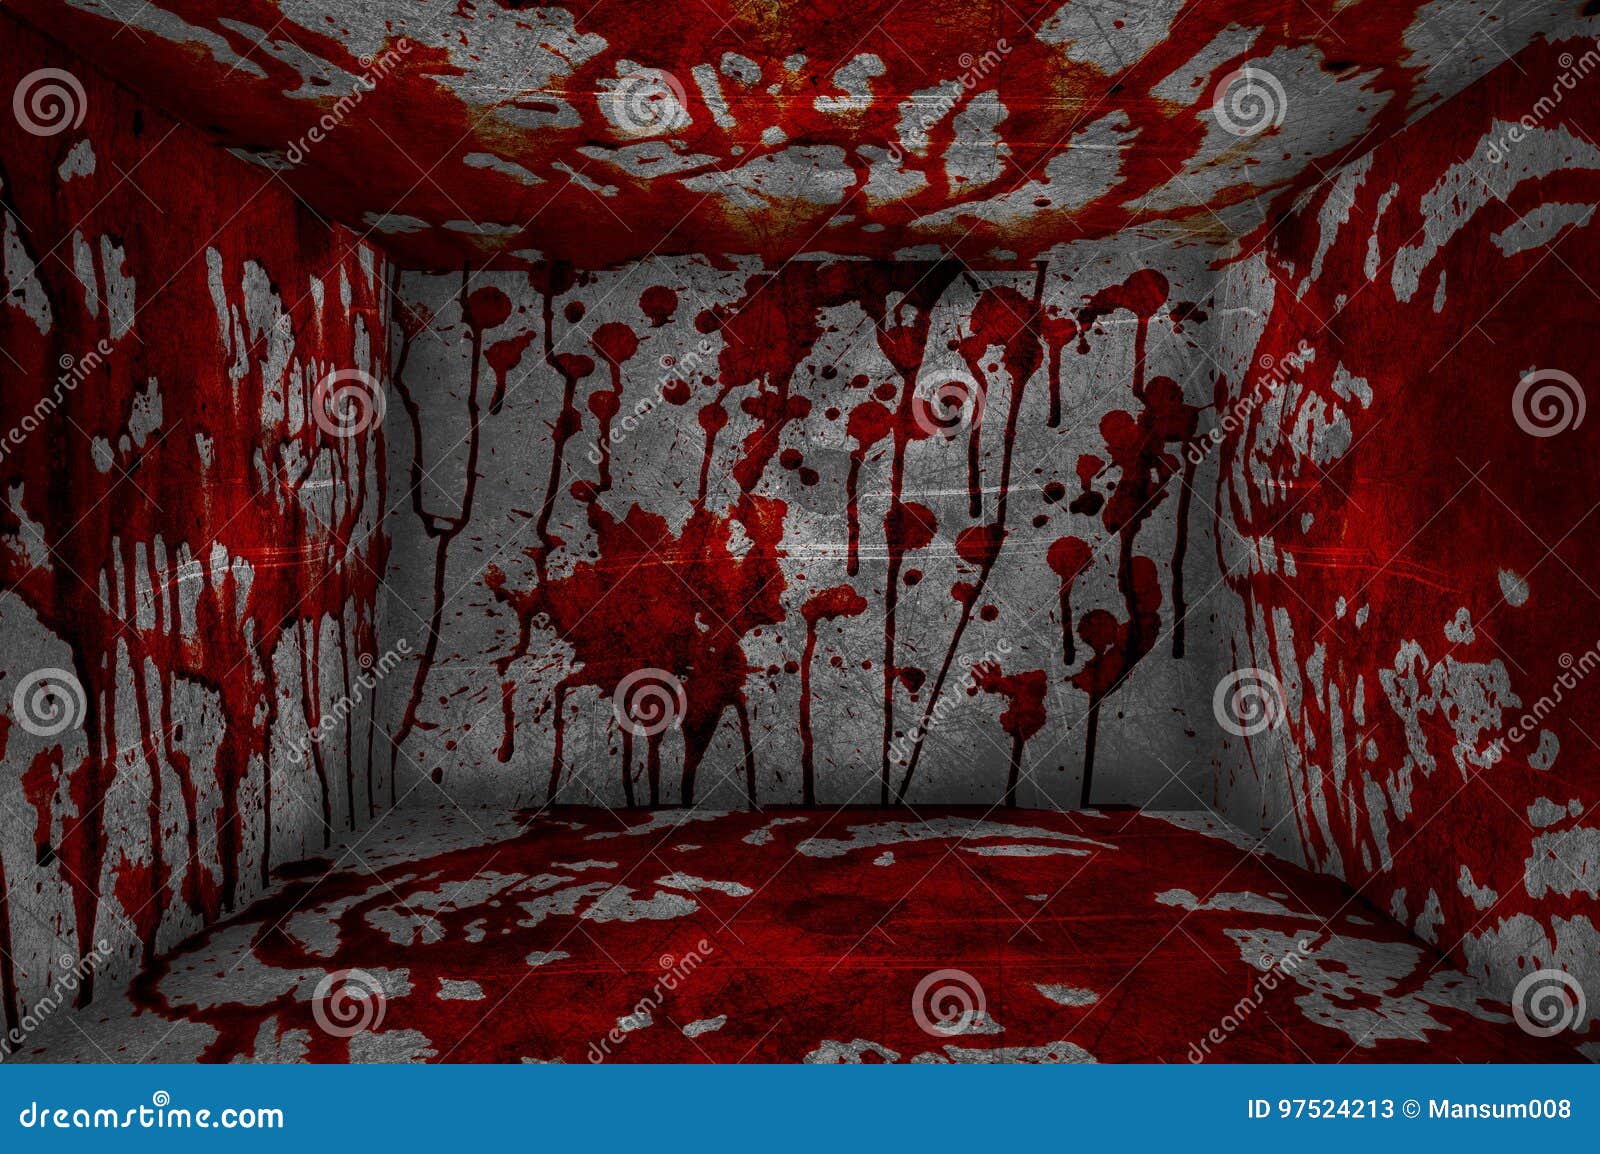 Red Blood On Dark Concrete Room Background Stock Image